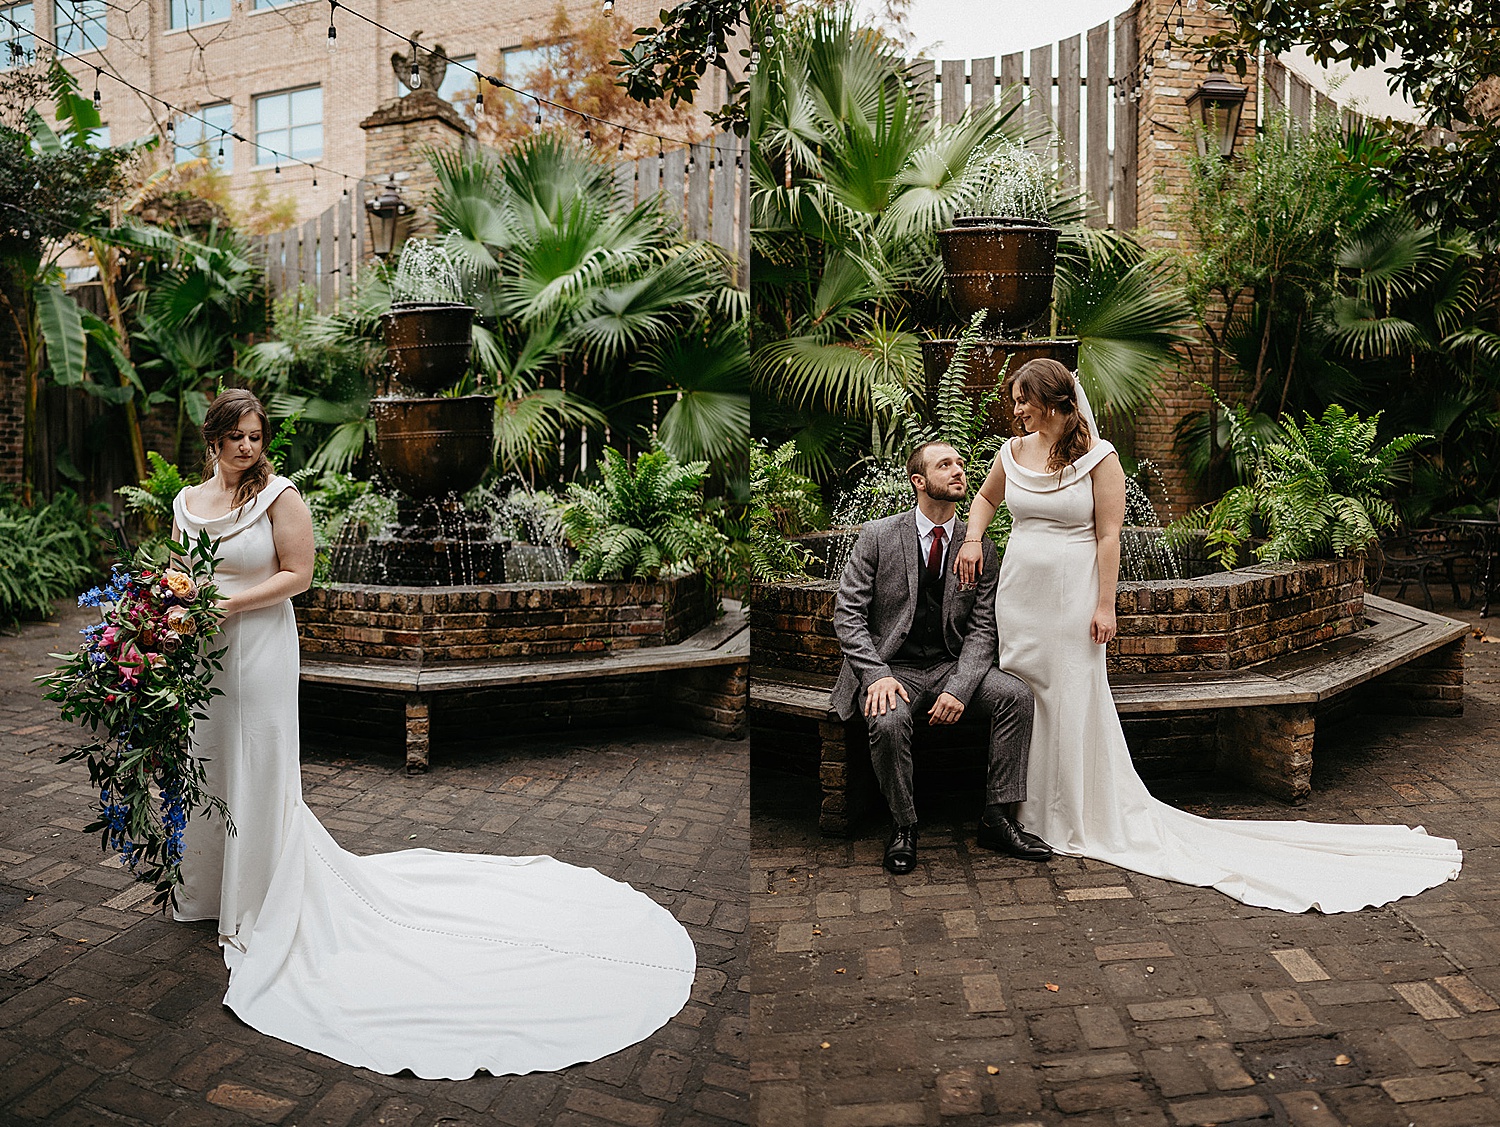 Bride and groom portraits at Seville quarter wedding venue in the courtyard